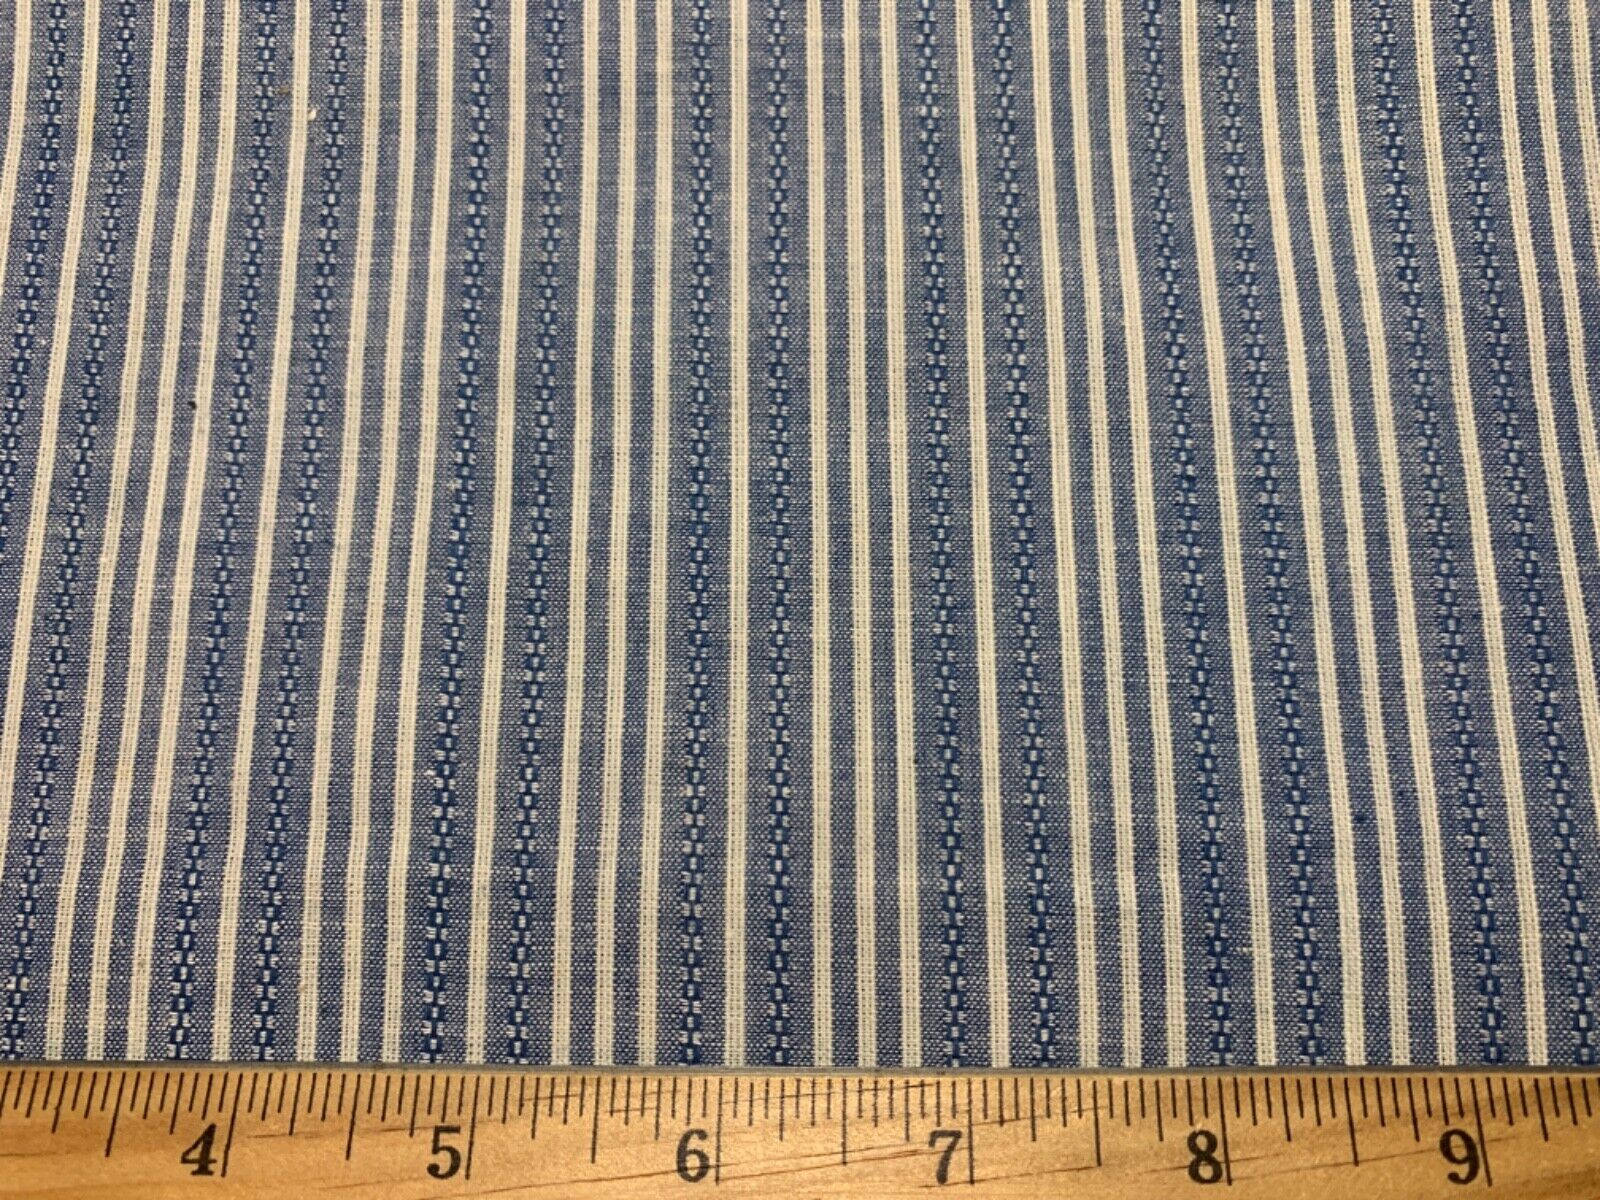 Antique Vintage Cotton Fabric Late 1800s Early 1900s Indigo Blue 1/2yd 25w